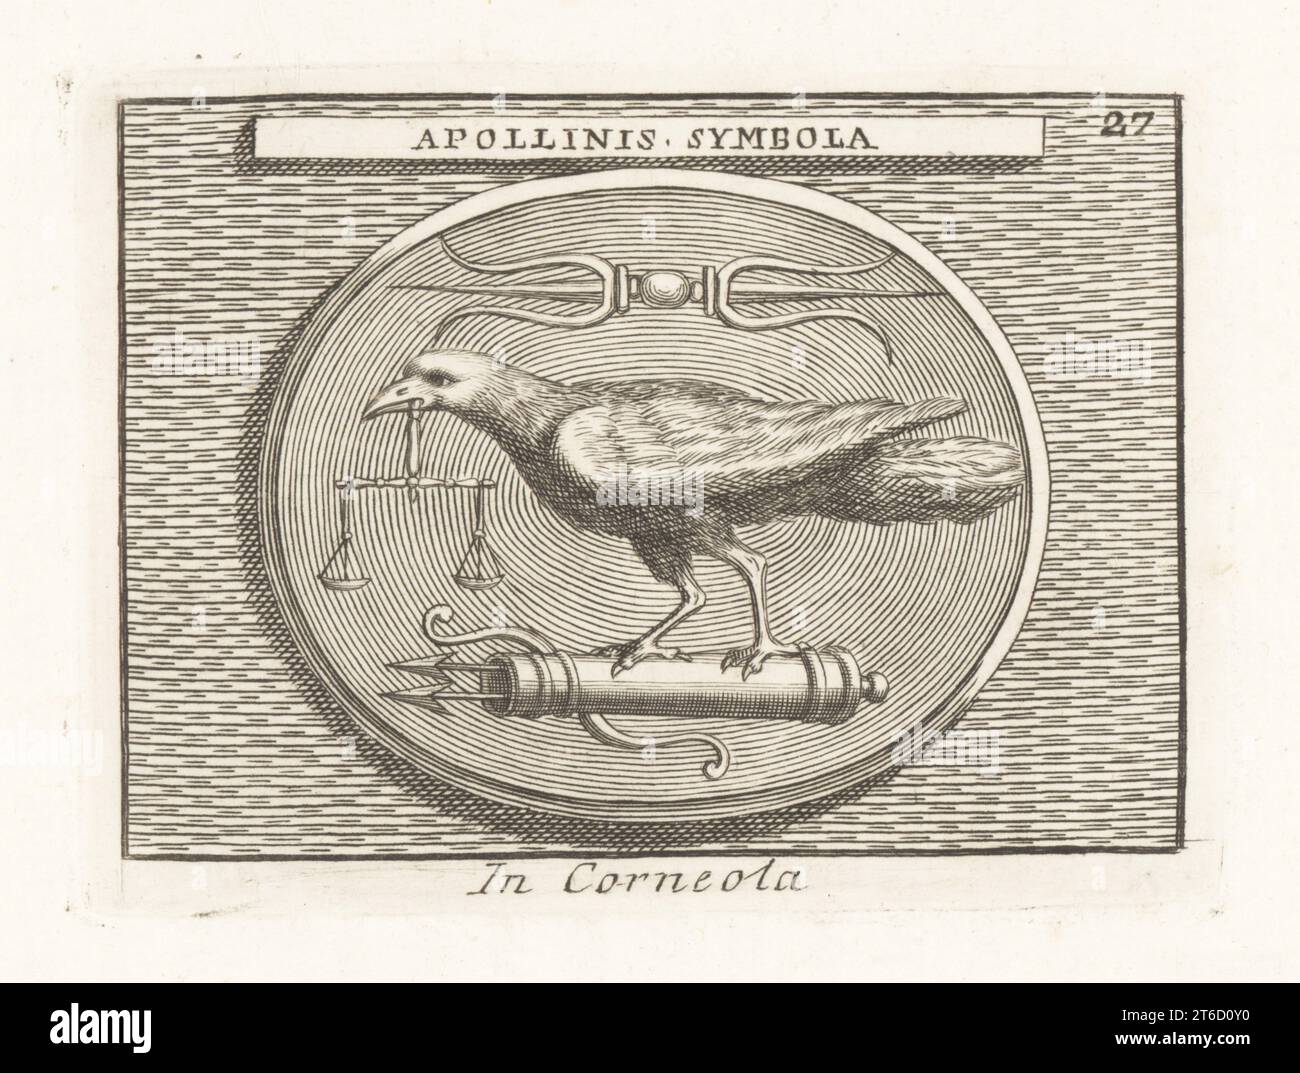 Symbols of the Greek god Apollo: raven standing on a quiver, bow and arrows, holding a weighing scale in its beak. A thunderbolt over its head. Apulu, chthonic sky god, to the Etruscans. From an engraved cornelian gem. Apollinis Symbola in Corneola. Copperplate engraving from Francesco Valesio, Antonio Gori and Ridolfino Venutis Academia Etrusca, Museum Cortonense in quo Vetera Monumenta, (Etruscan Academy or Museum of Cortona), Faustus Amideus, Rome, 1750.. Copperplate engraving from Francesco Valesio, Antonio Gori and Ridolfino Venutis Academia Etrusca, Museum Cortonense in quo Vetera Monume Stock Photo